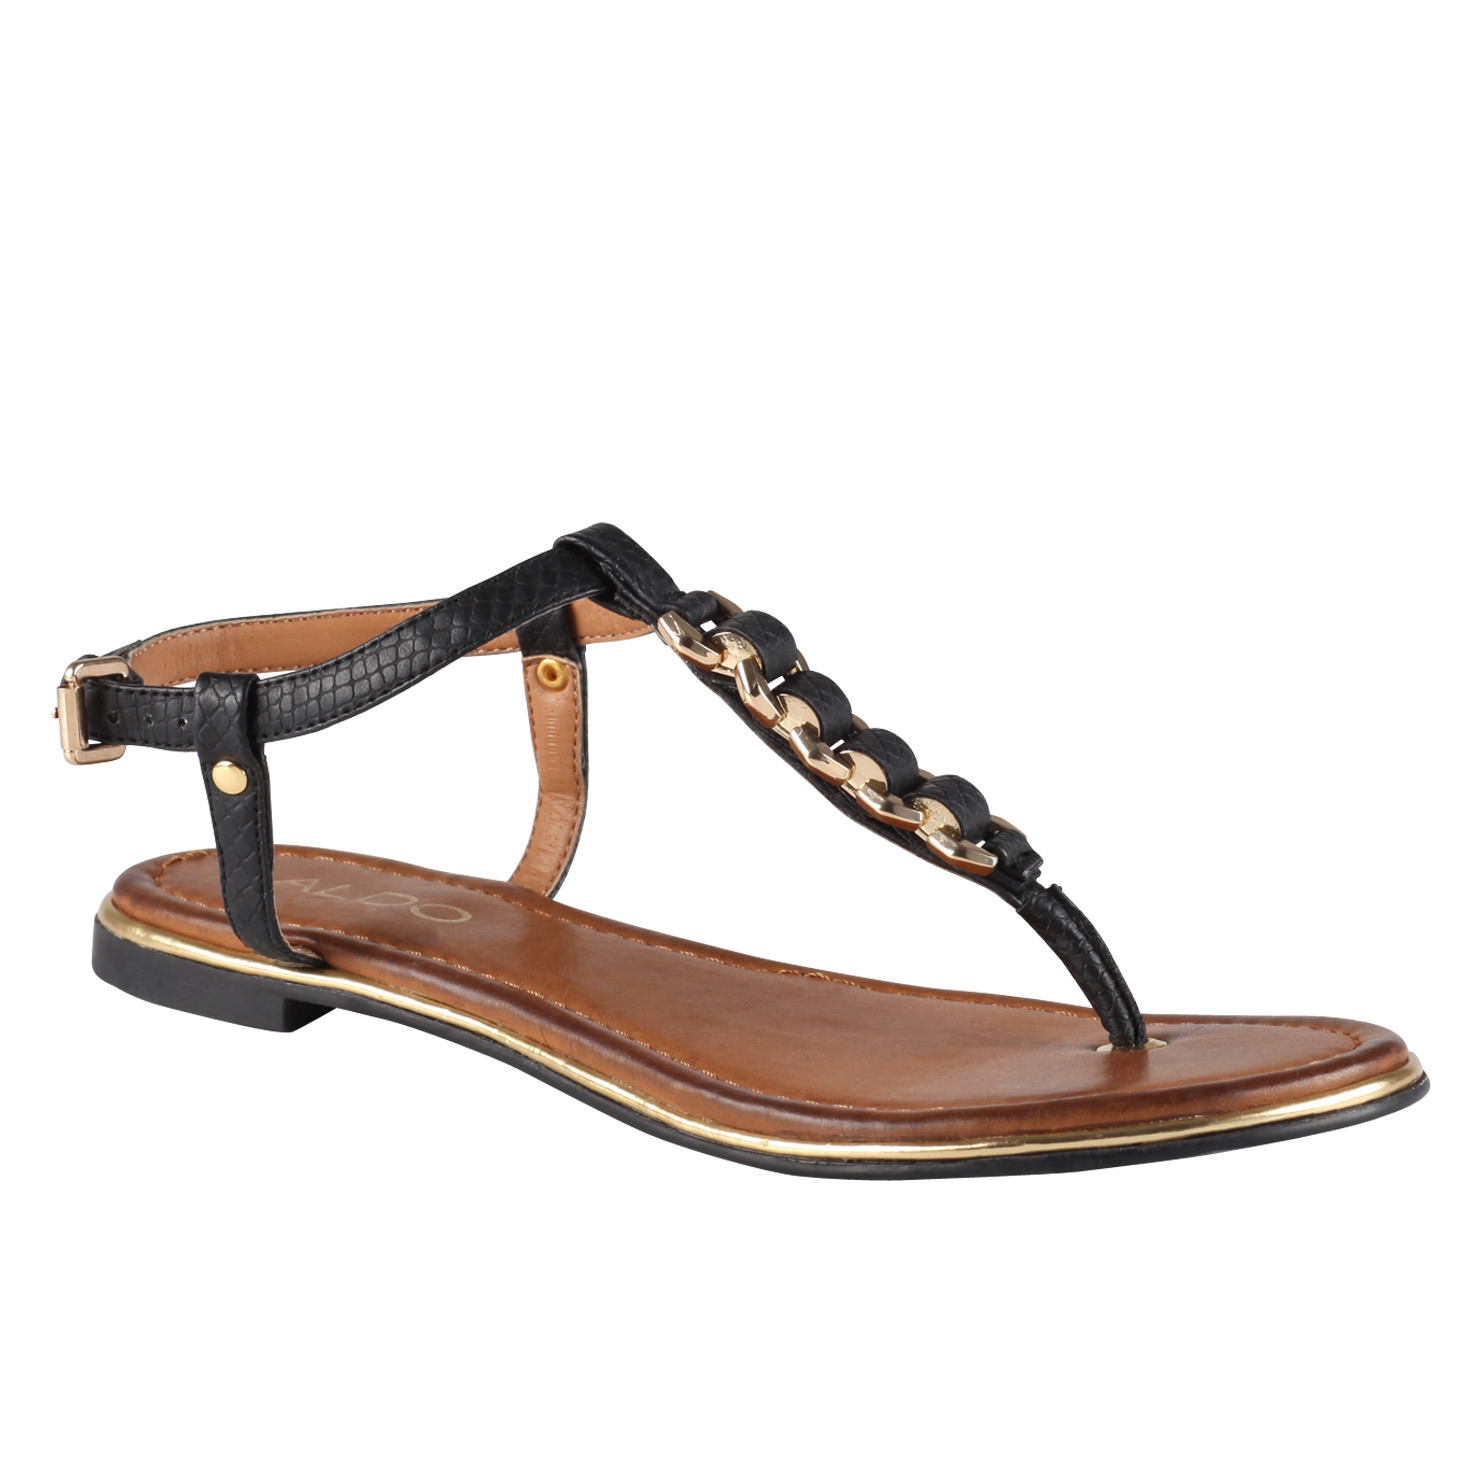 New Look latest summer sandal shoes collection 2015 (2)